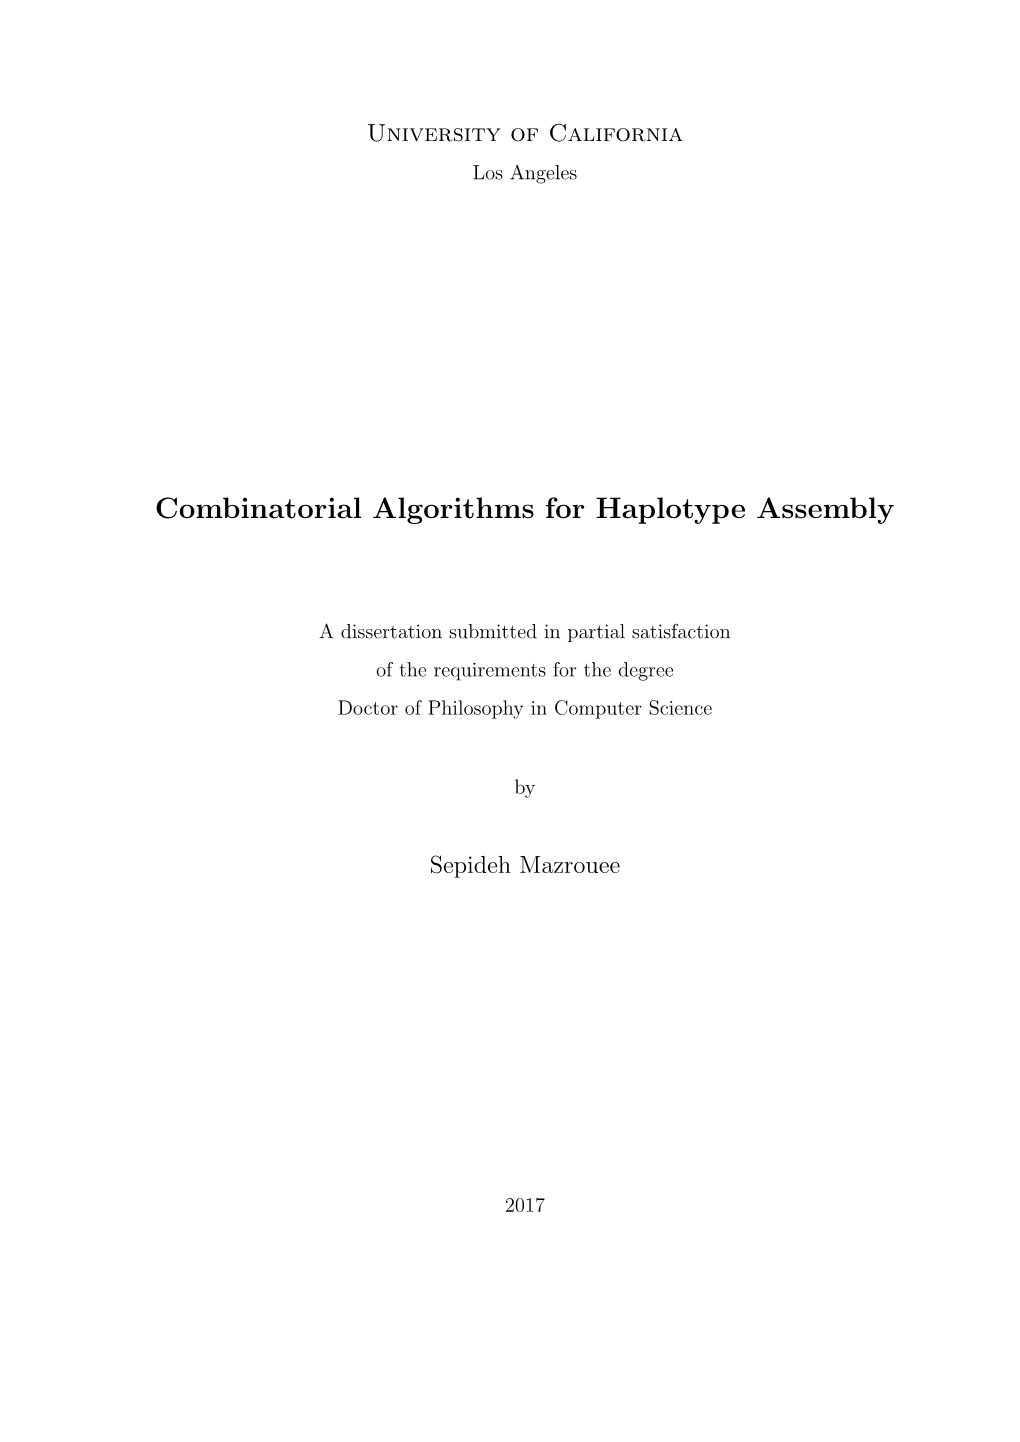 Combinatorial Algorithms for Haplotype Assembly